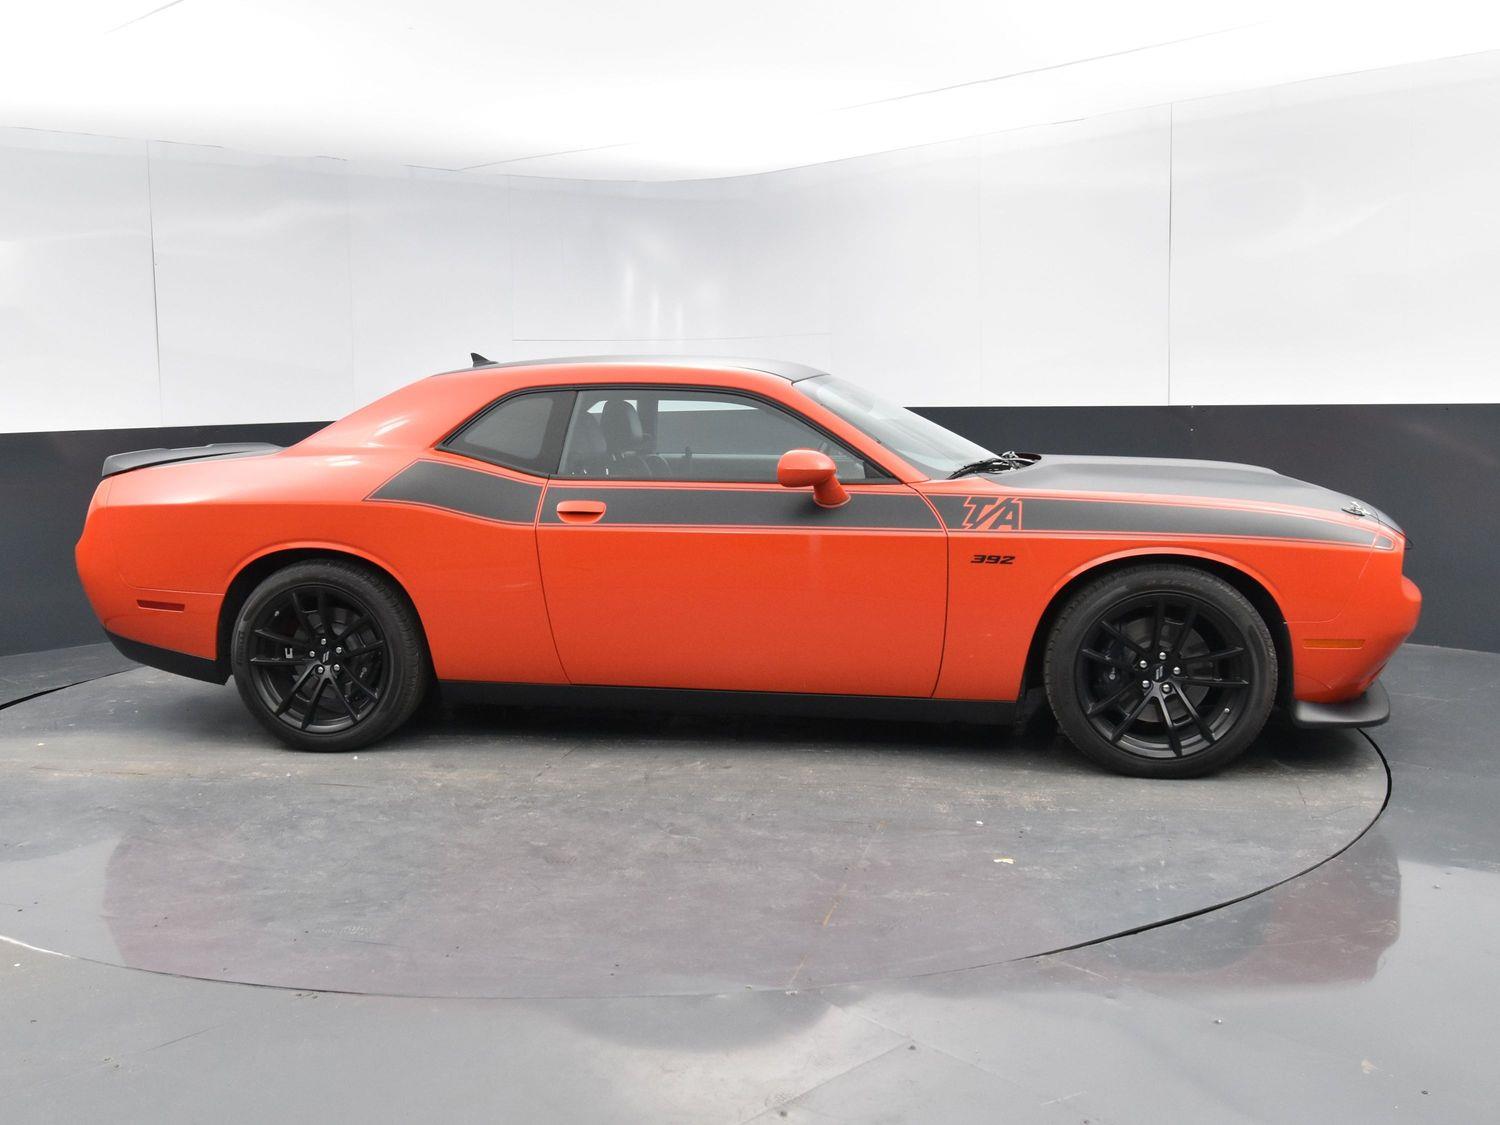 Used 2021 Dodge Challenger R/T Scat Pack Coupe for sale in Grand Island NE